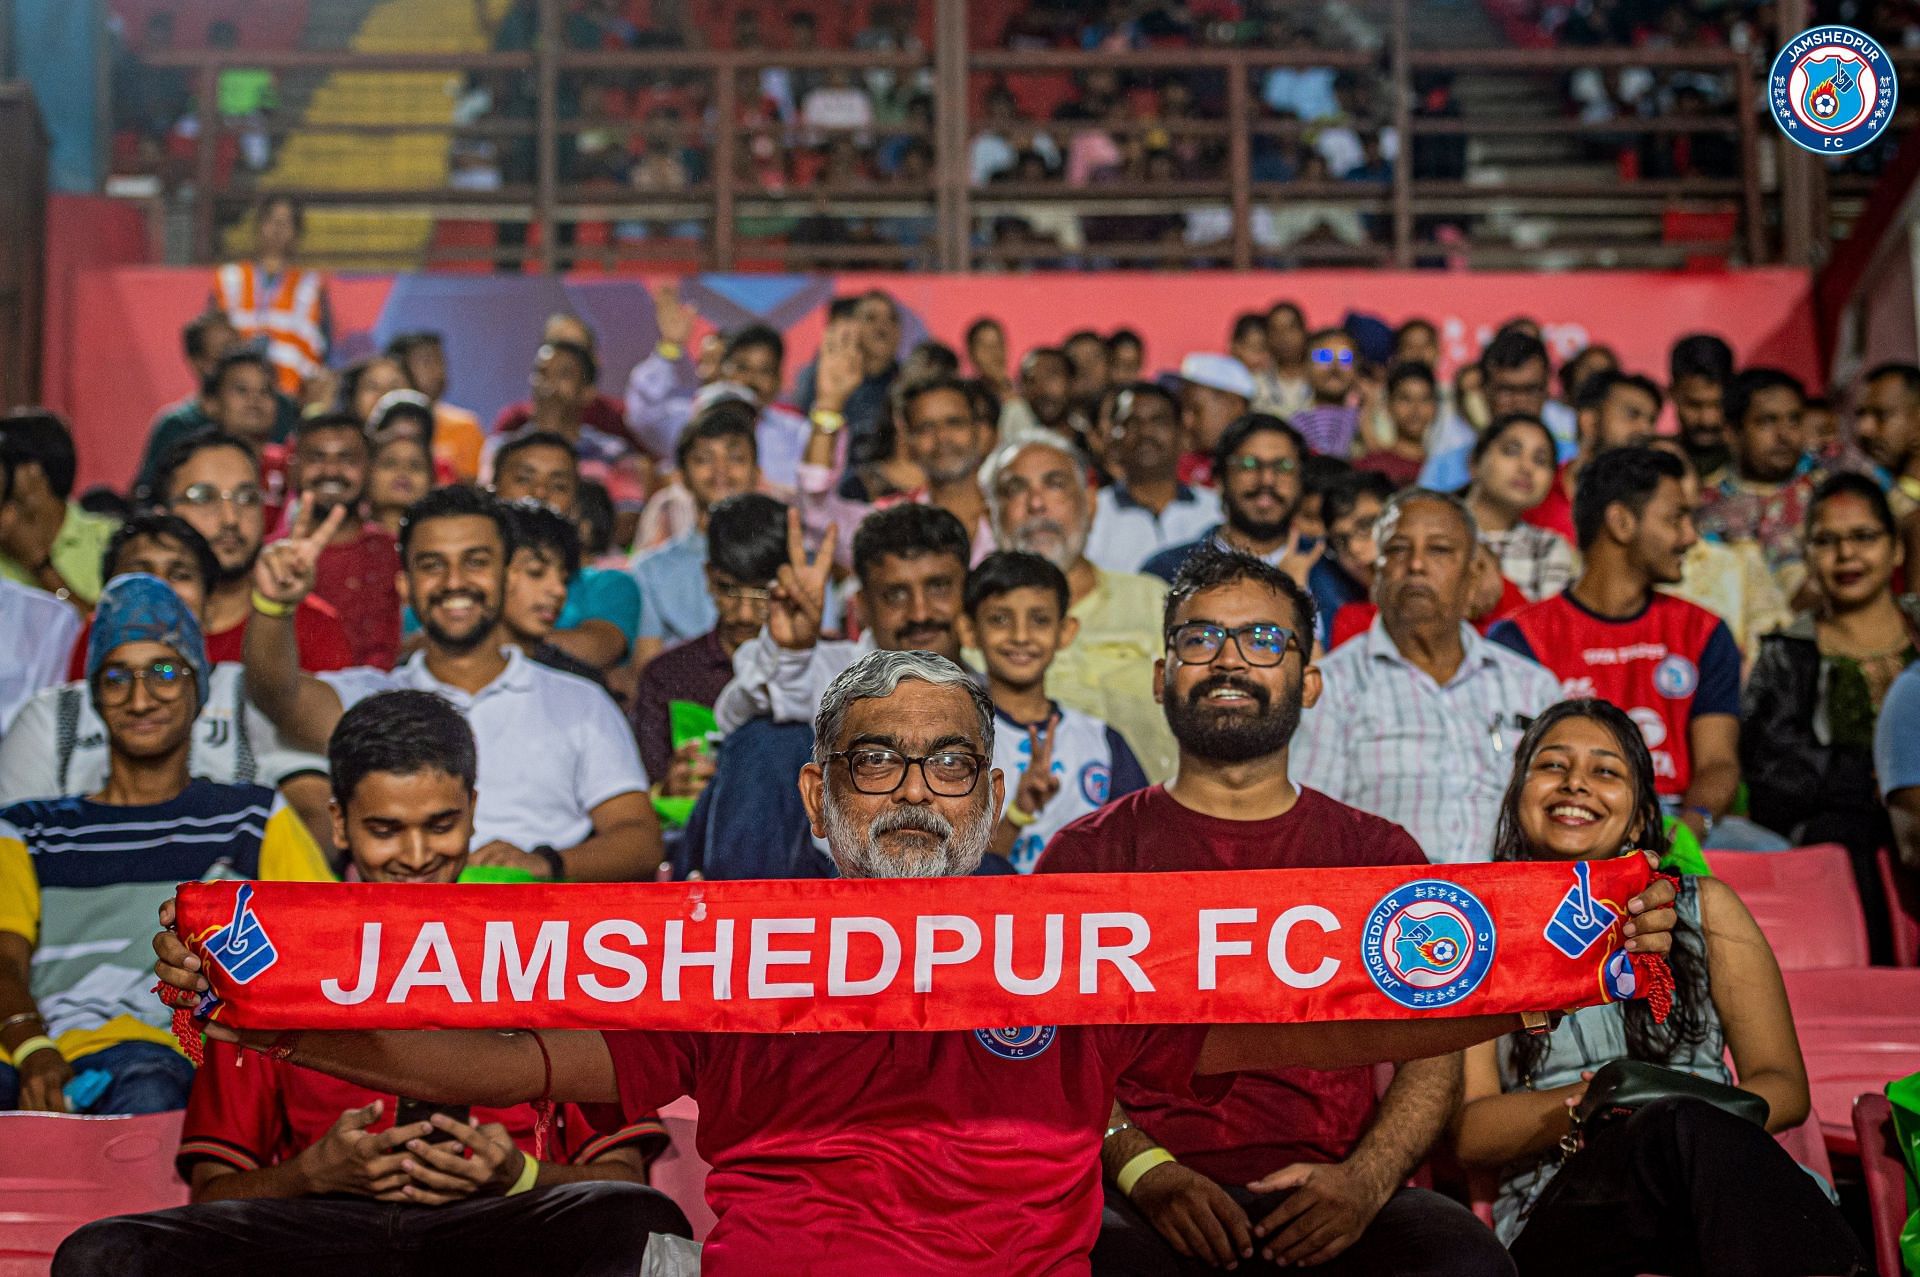 Jamshedpur FC will return to their home ground.